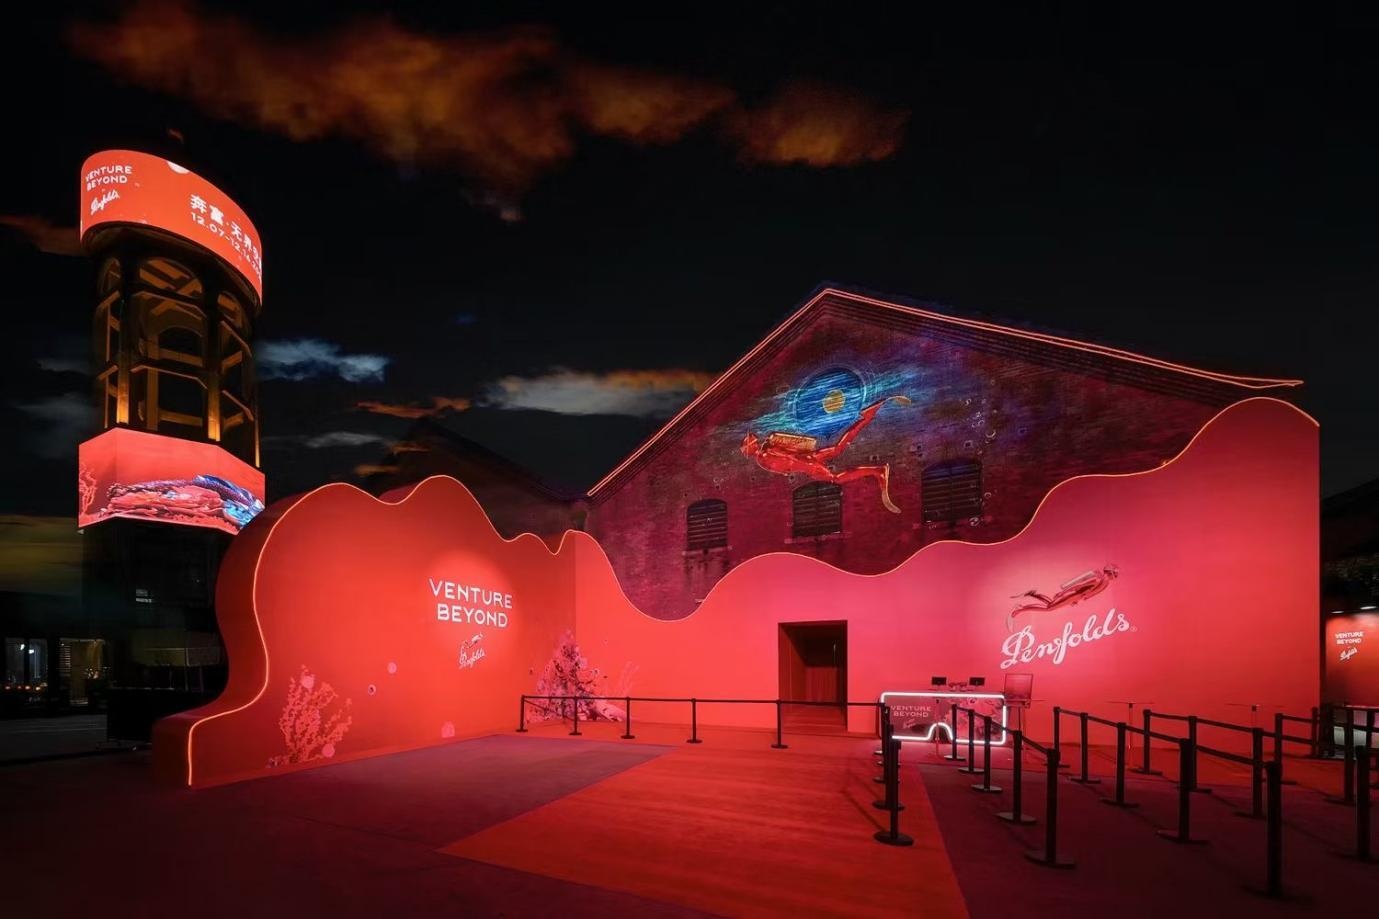 Taikoo Warehouse in Guangzhou was the setting for Penfolds’ latest ‘Venture Beyond’ immersive wine experience held under an oceanic theme. Photo: Penfolds